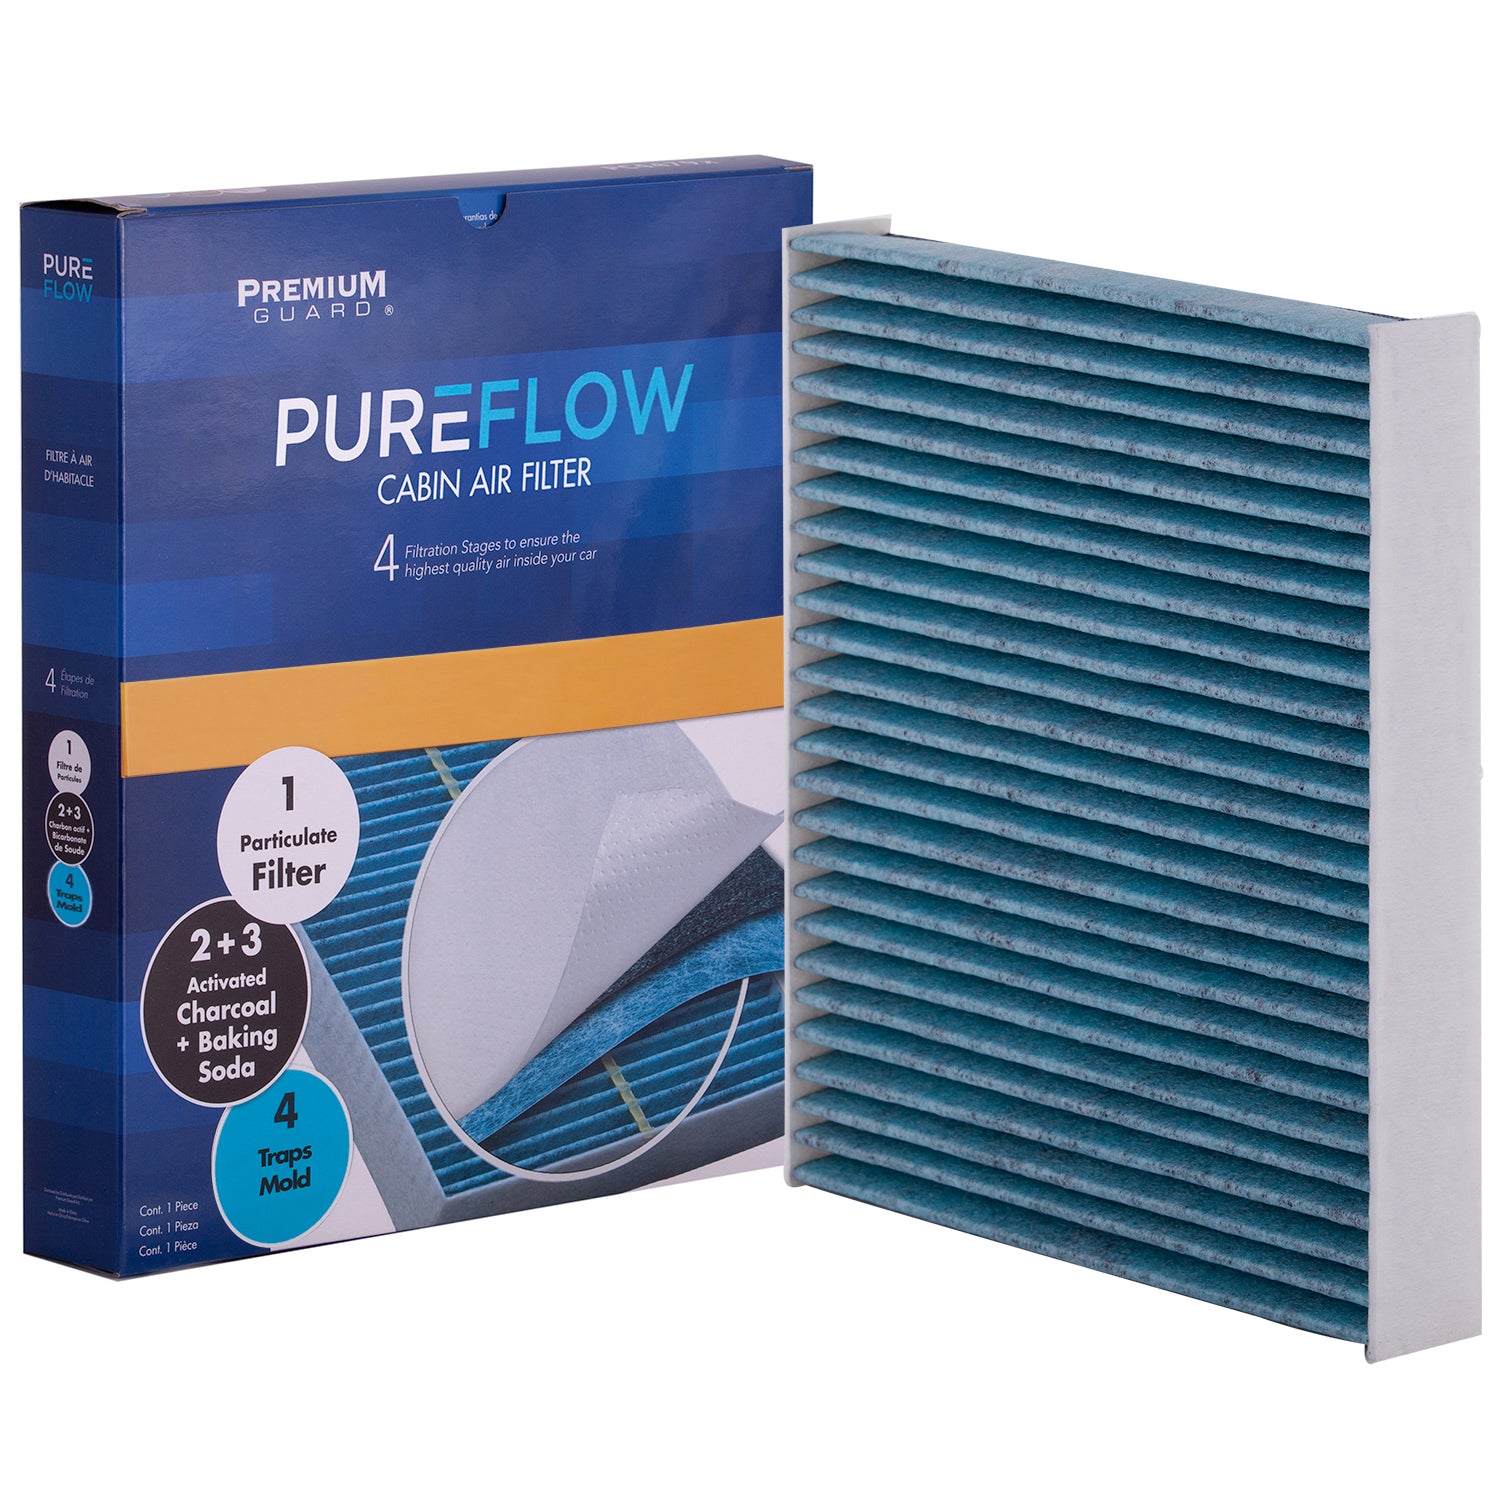 PUREFLOW 2019 Lexus RX350 Cabin Air Filter with Antibacterial Technology, PC99237X